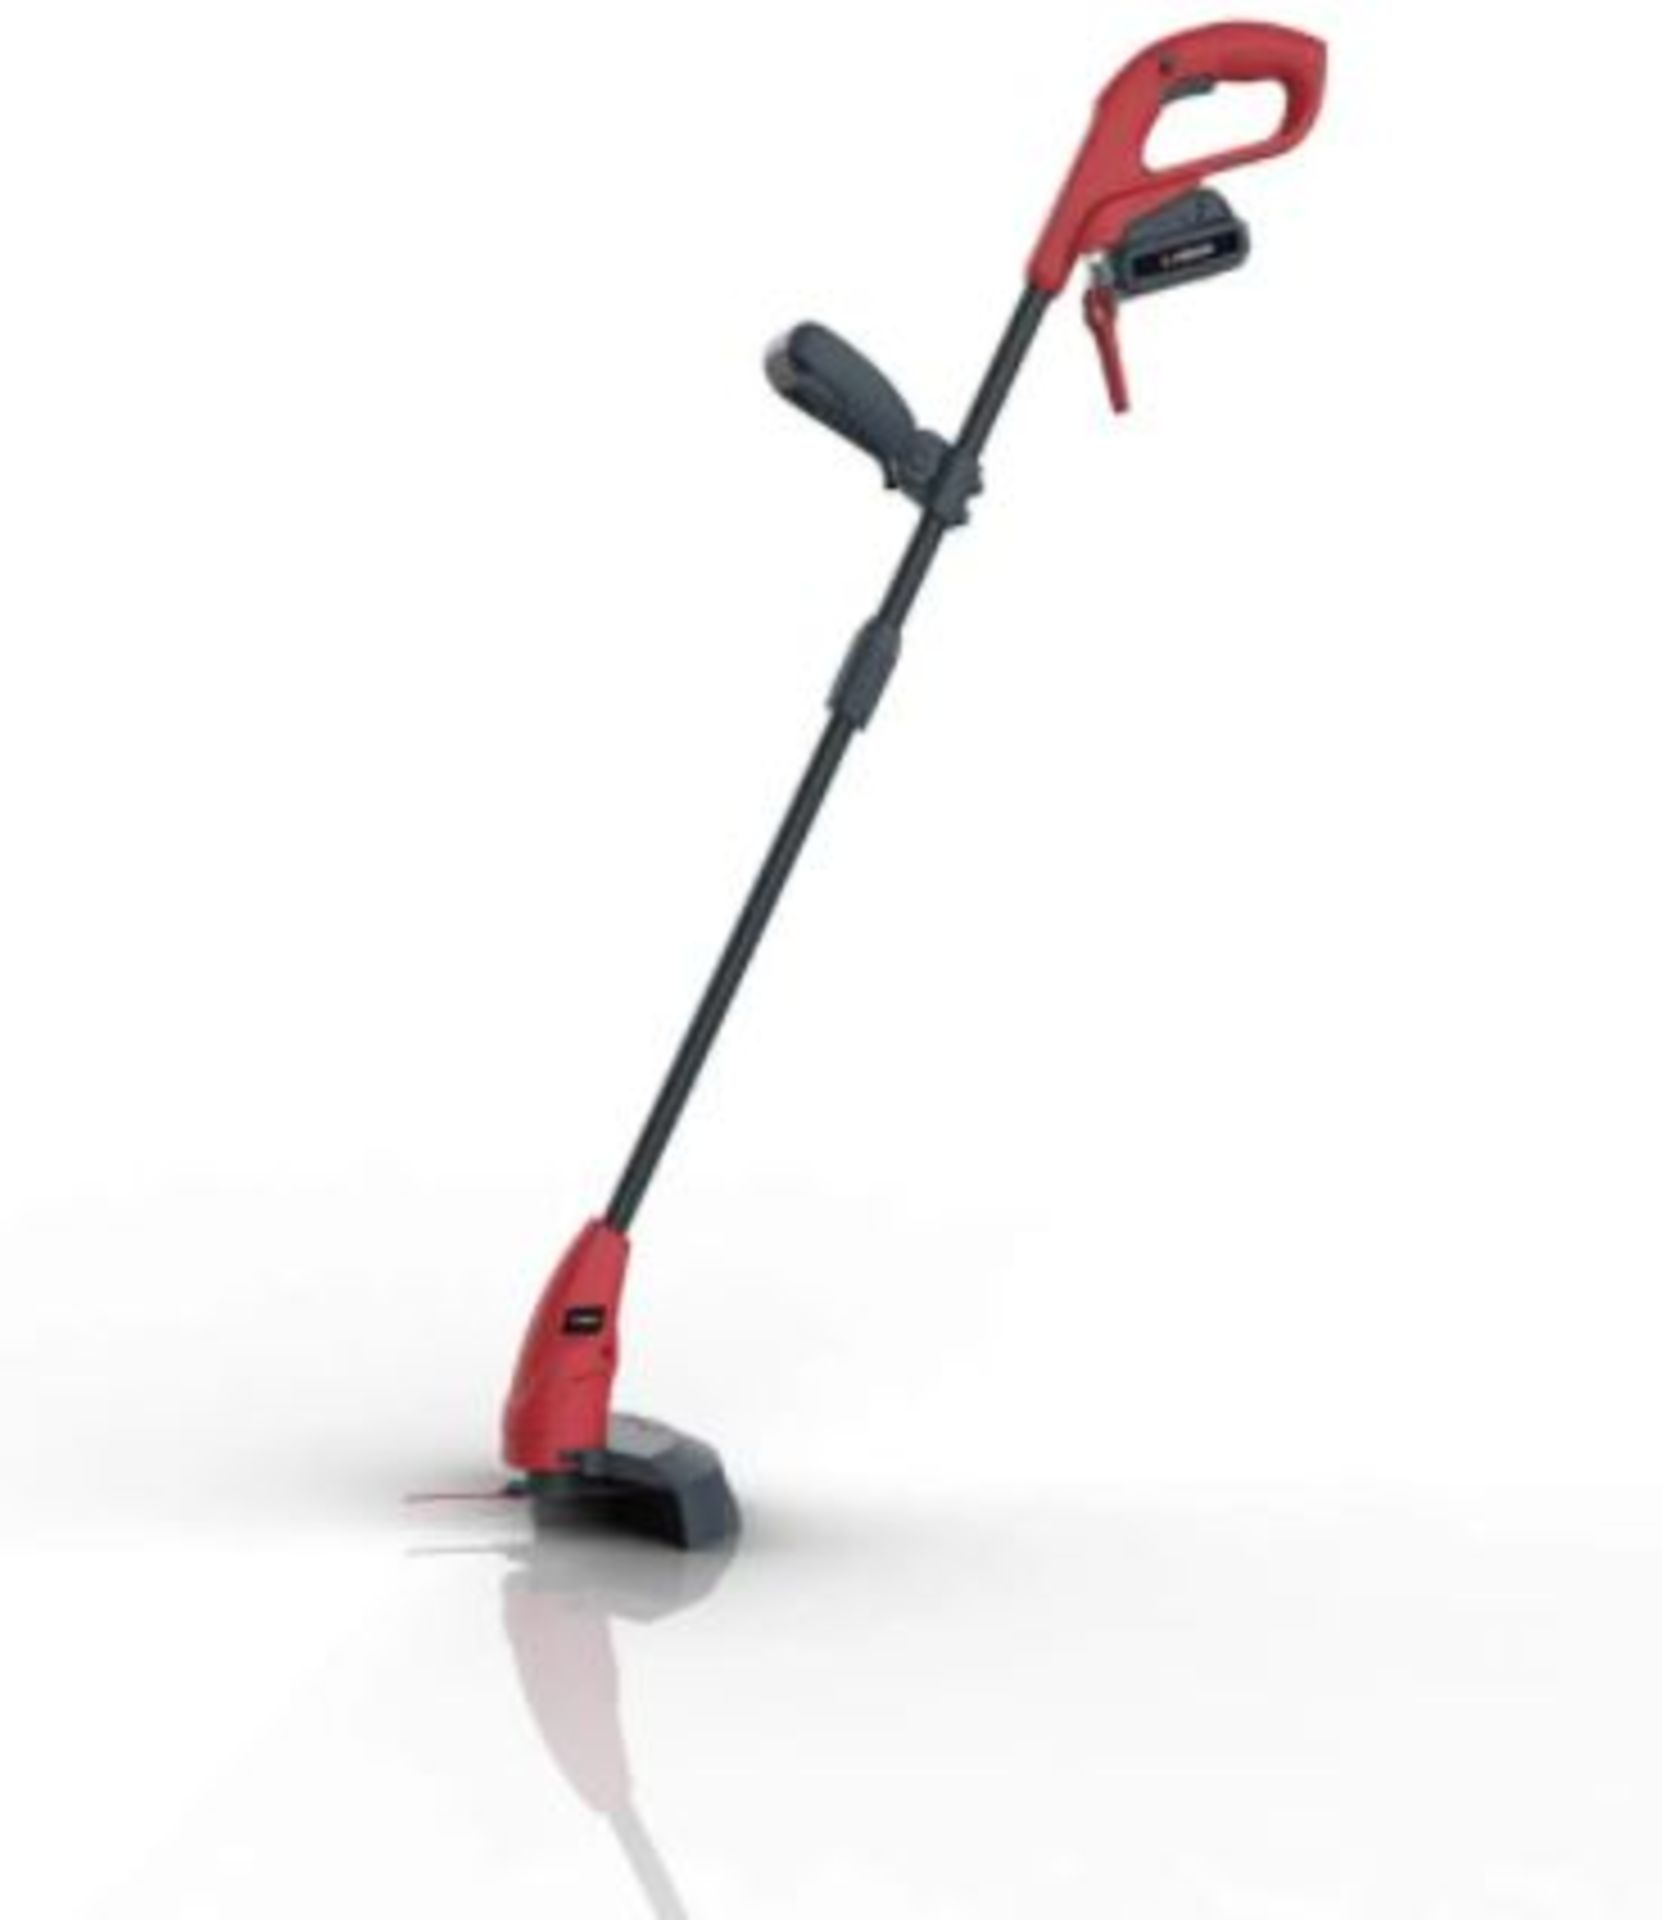 (R5G) 5 Sovereign Items. 2x Cordless Grass Trimmer (No Batteries). 1x Corded Grass Trimmer. 1x 32cm - Image 3 of 5